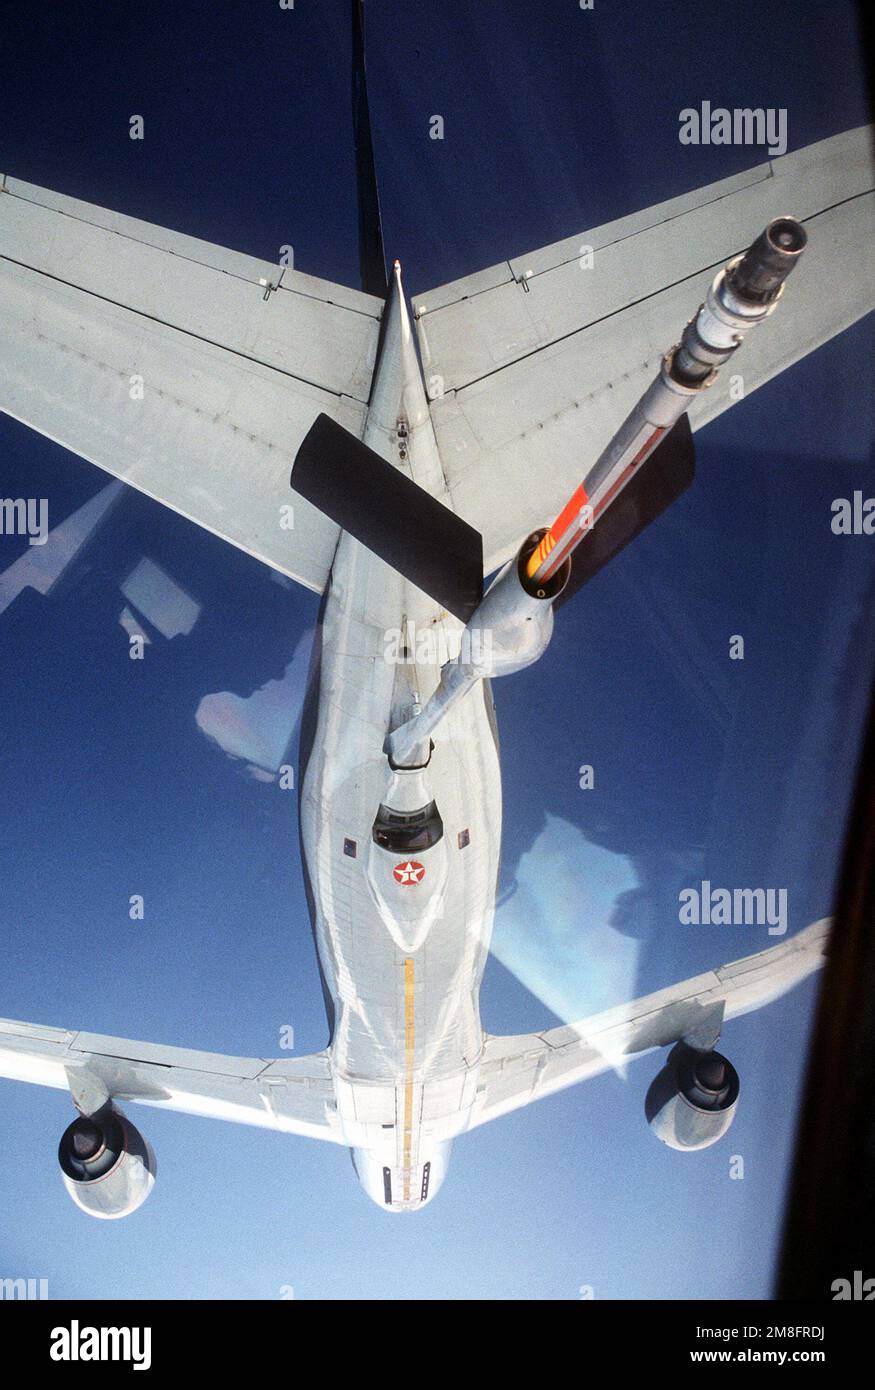 The refueling boom of a 306th Air Refueling Squadron KC-135R Stratotanker aircraft nears a 6th Air Refueling Squadron KC-10A Extender aircraft during a Military Airlift Command channel cargo mission. Country: Unknown Stock Photo